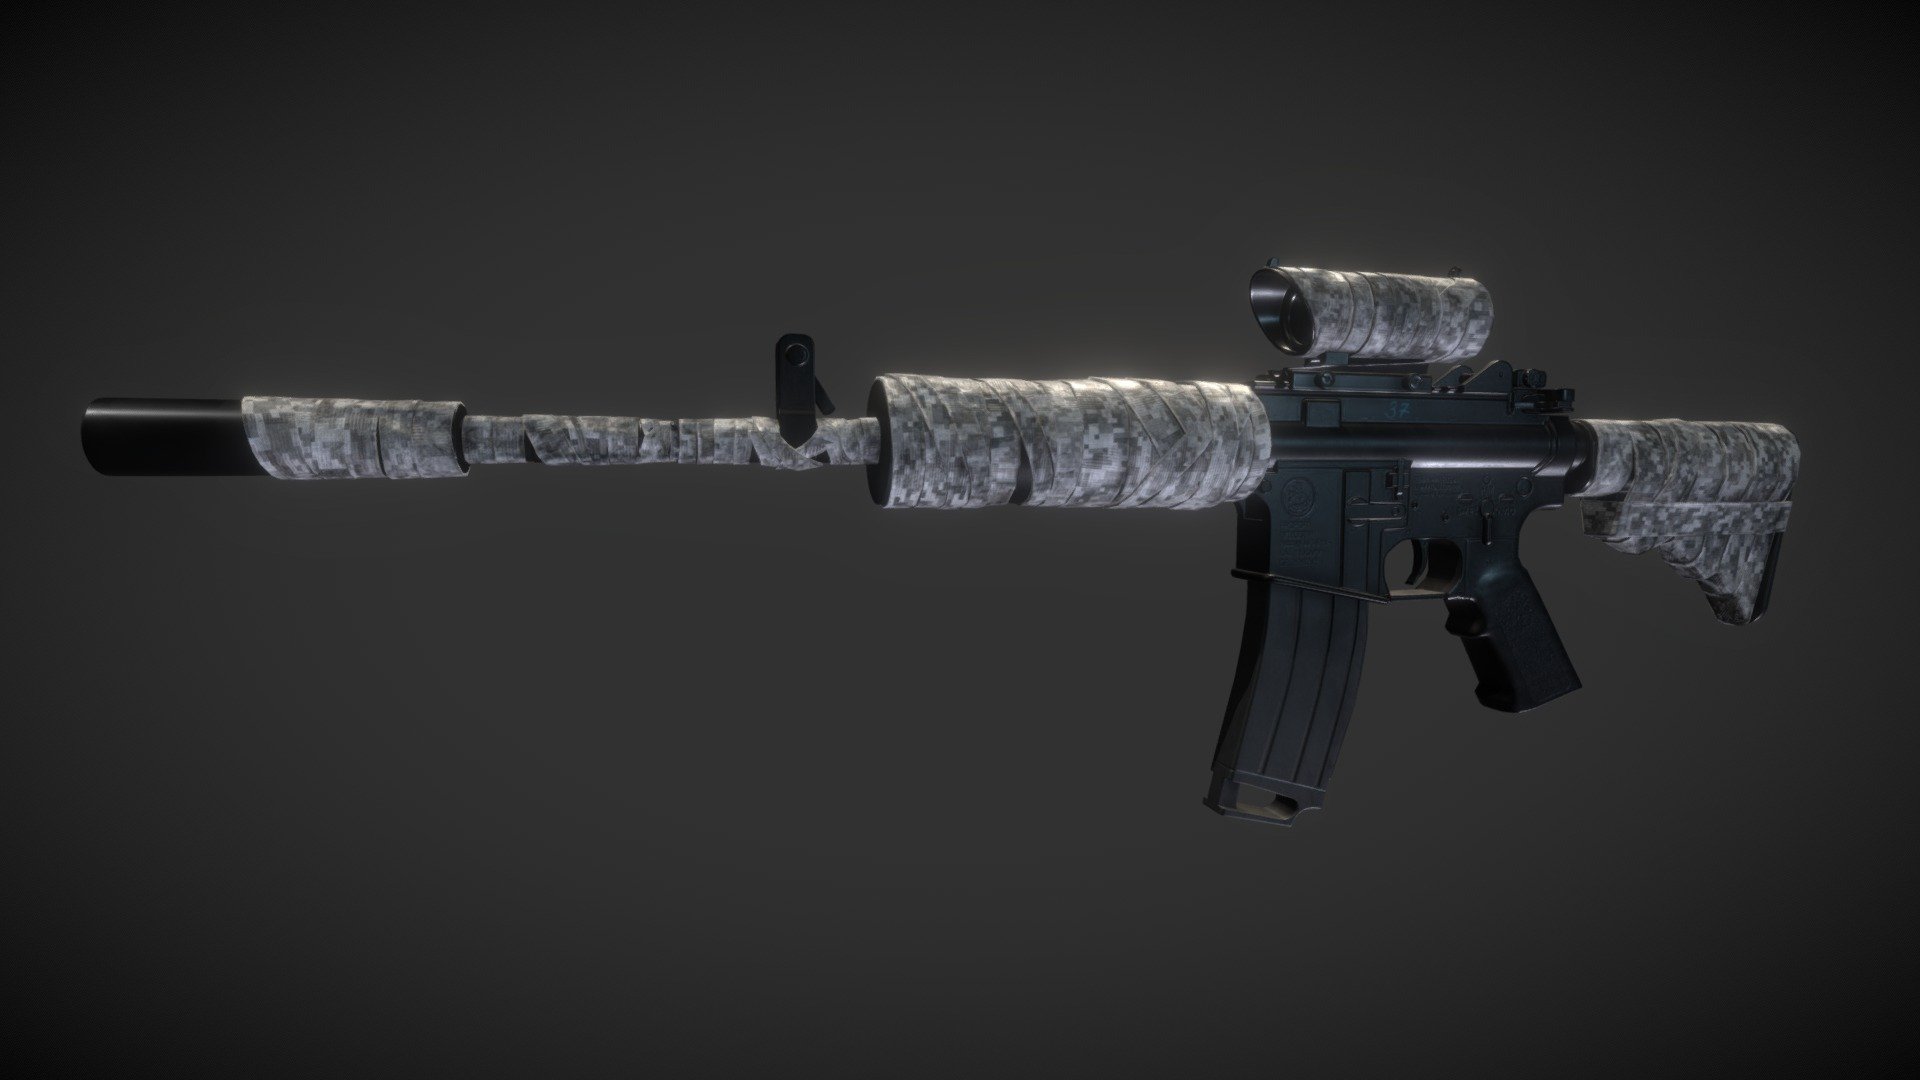 M4A1 rifle wrapped in bandages for camouflage. 29k triangles, the archive contains the model itself in fbx extension and textures in resolution from 1k to 4k in png format. The model is ready for export to game engines. Sight and bandages - a separate mesh with its own uv space. Renders can be viewed here: https://www.artstation.com/artwork/3dZRbD - M4A4-Bandage - 3D model by unknownoffc 3d model